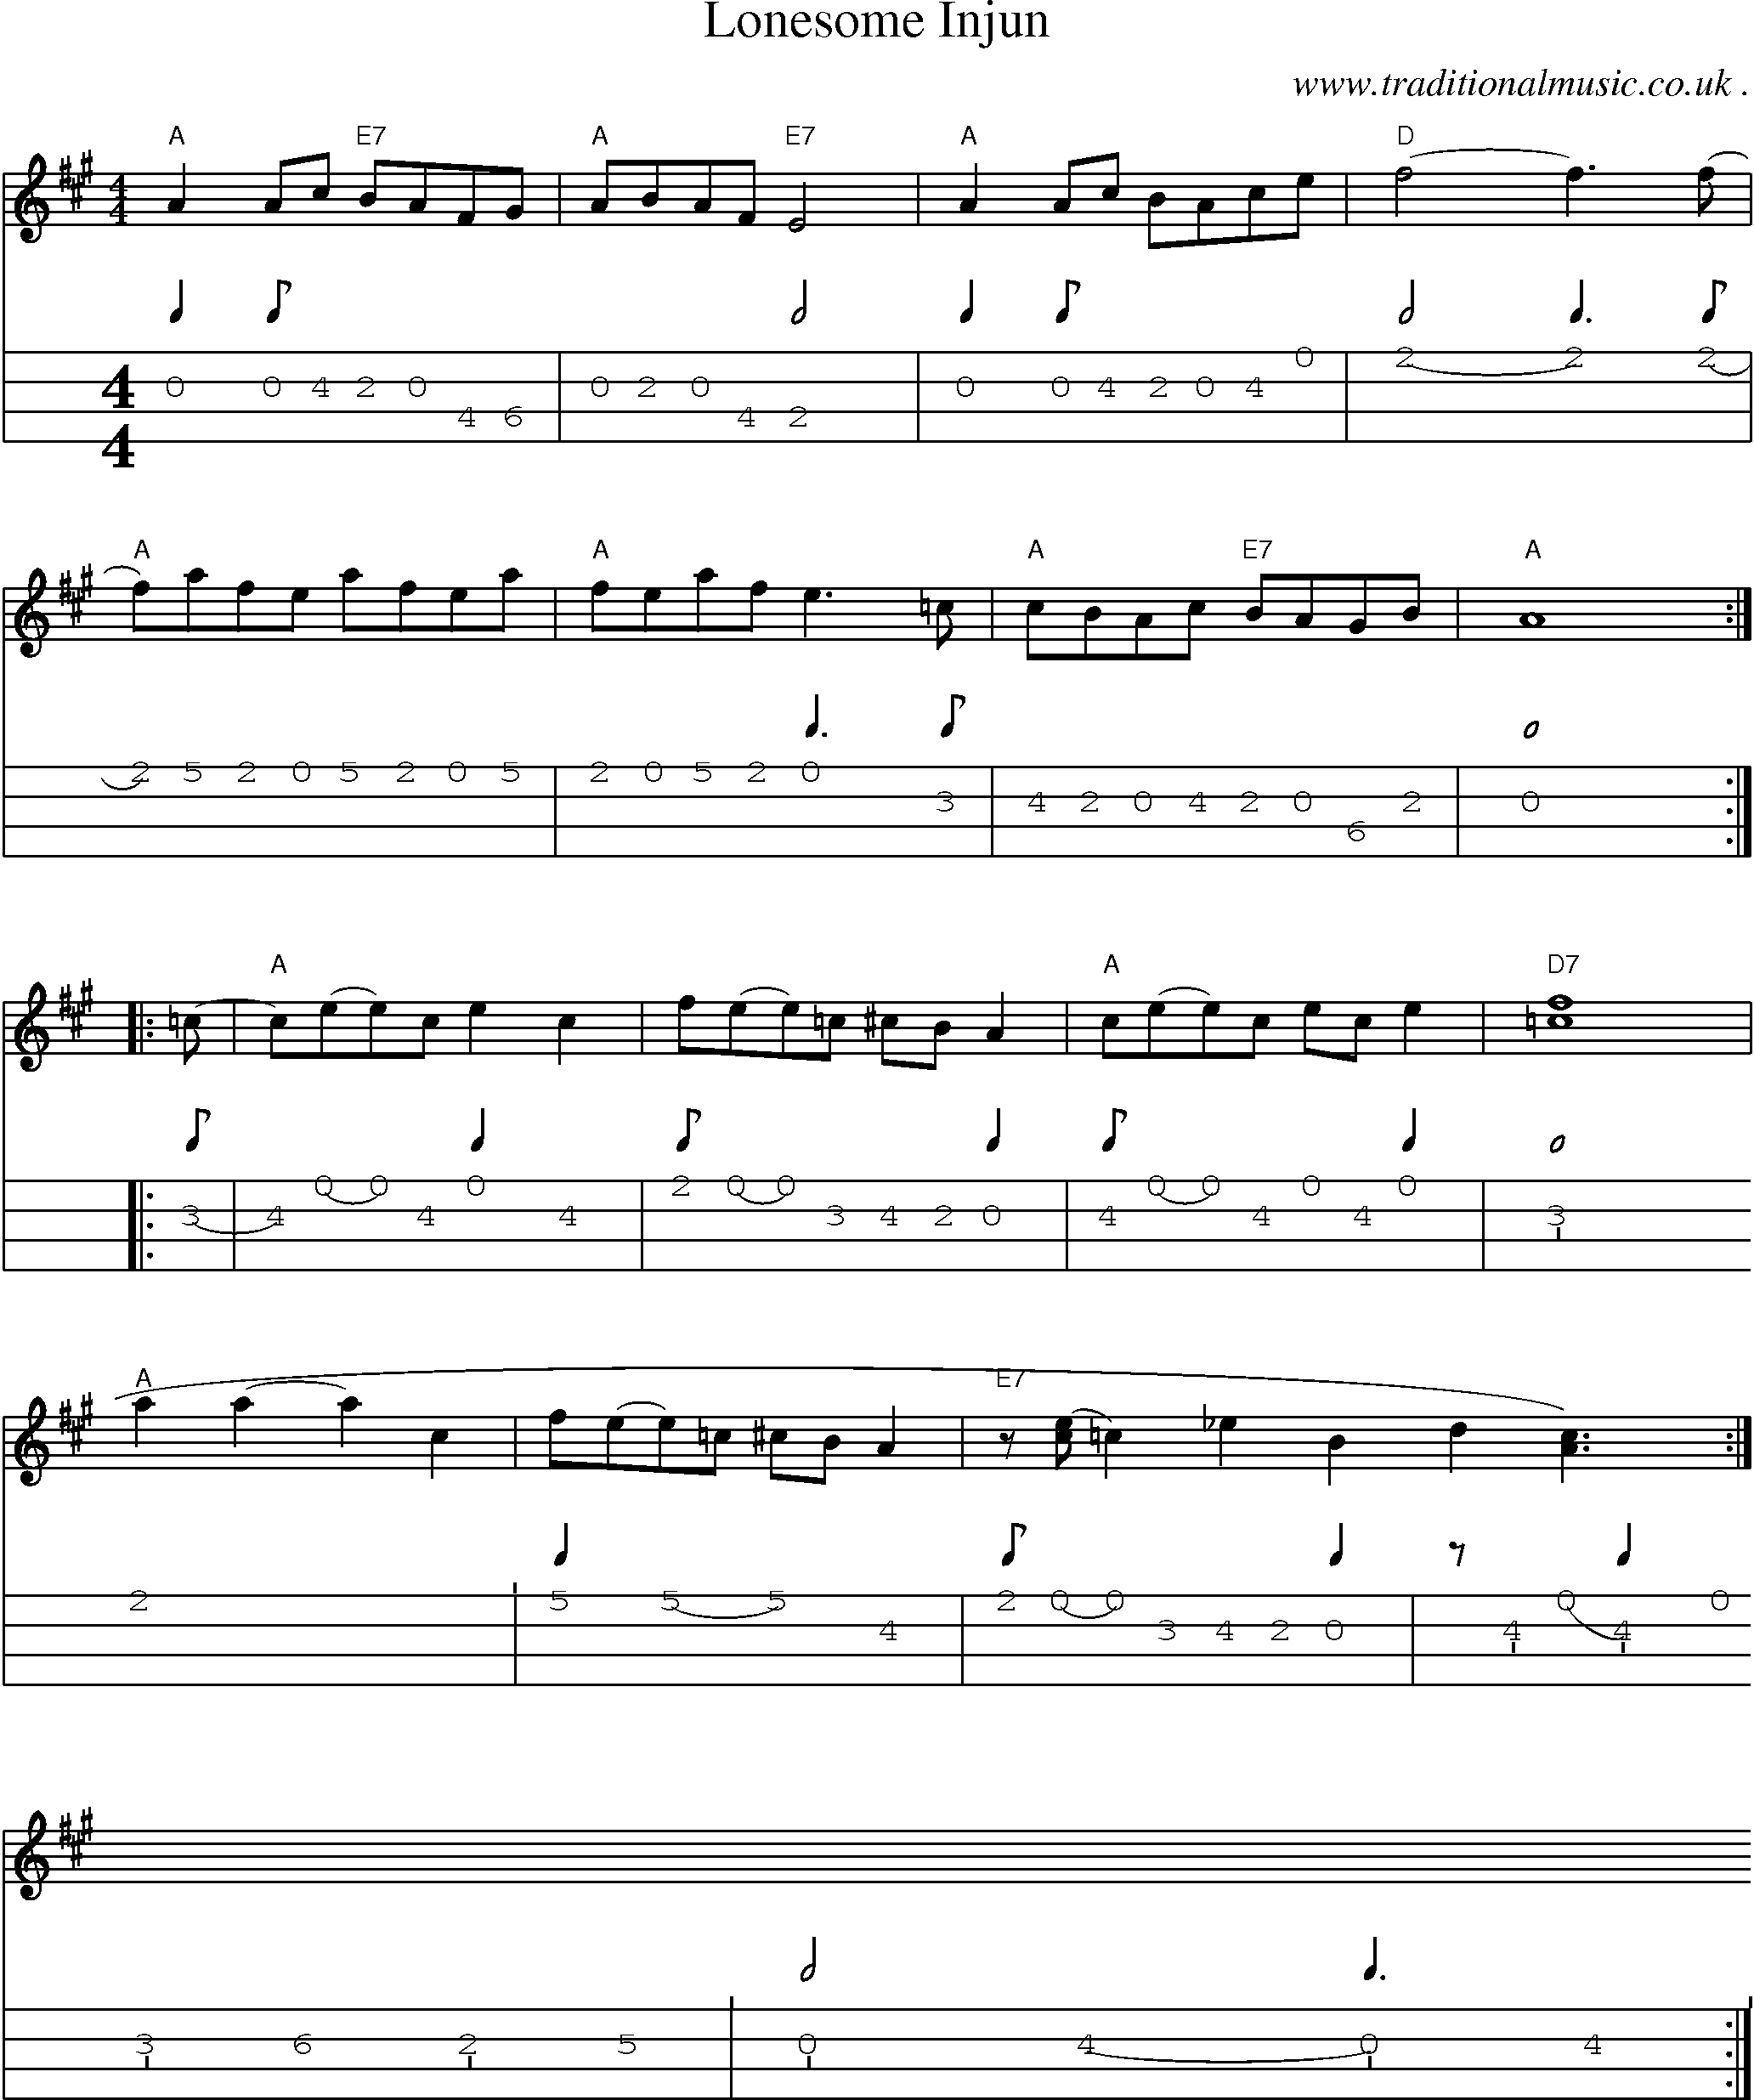 Music Score and Guitar Tabs for Lonesome Injun